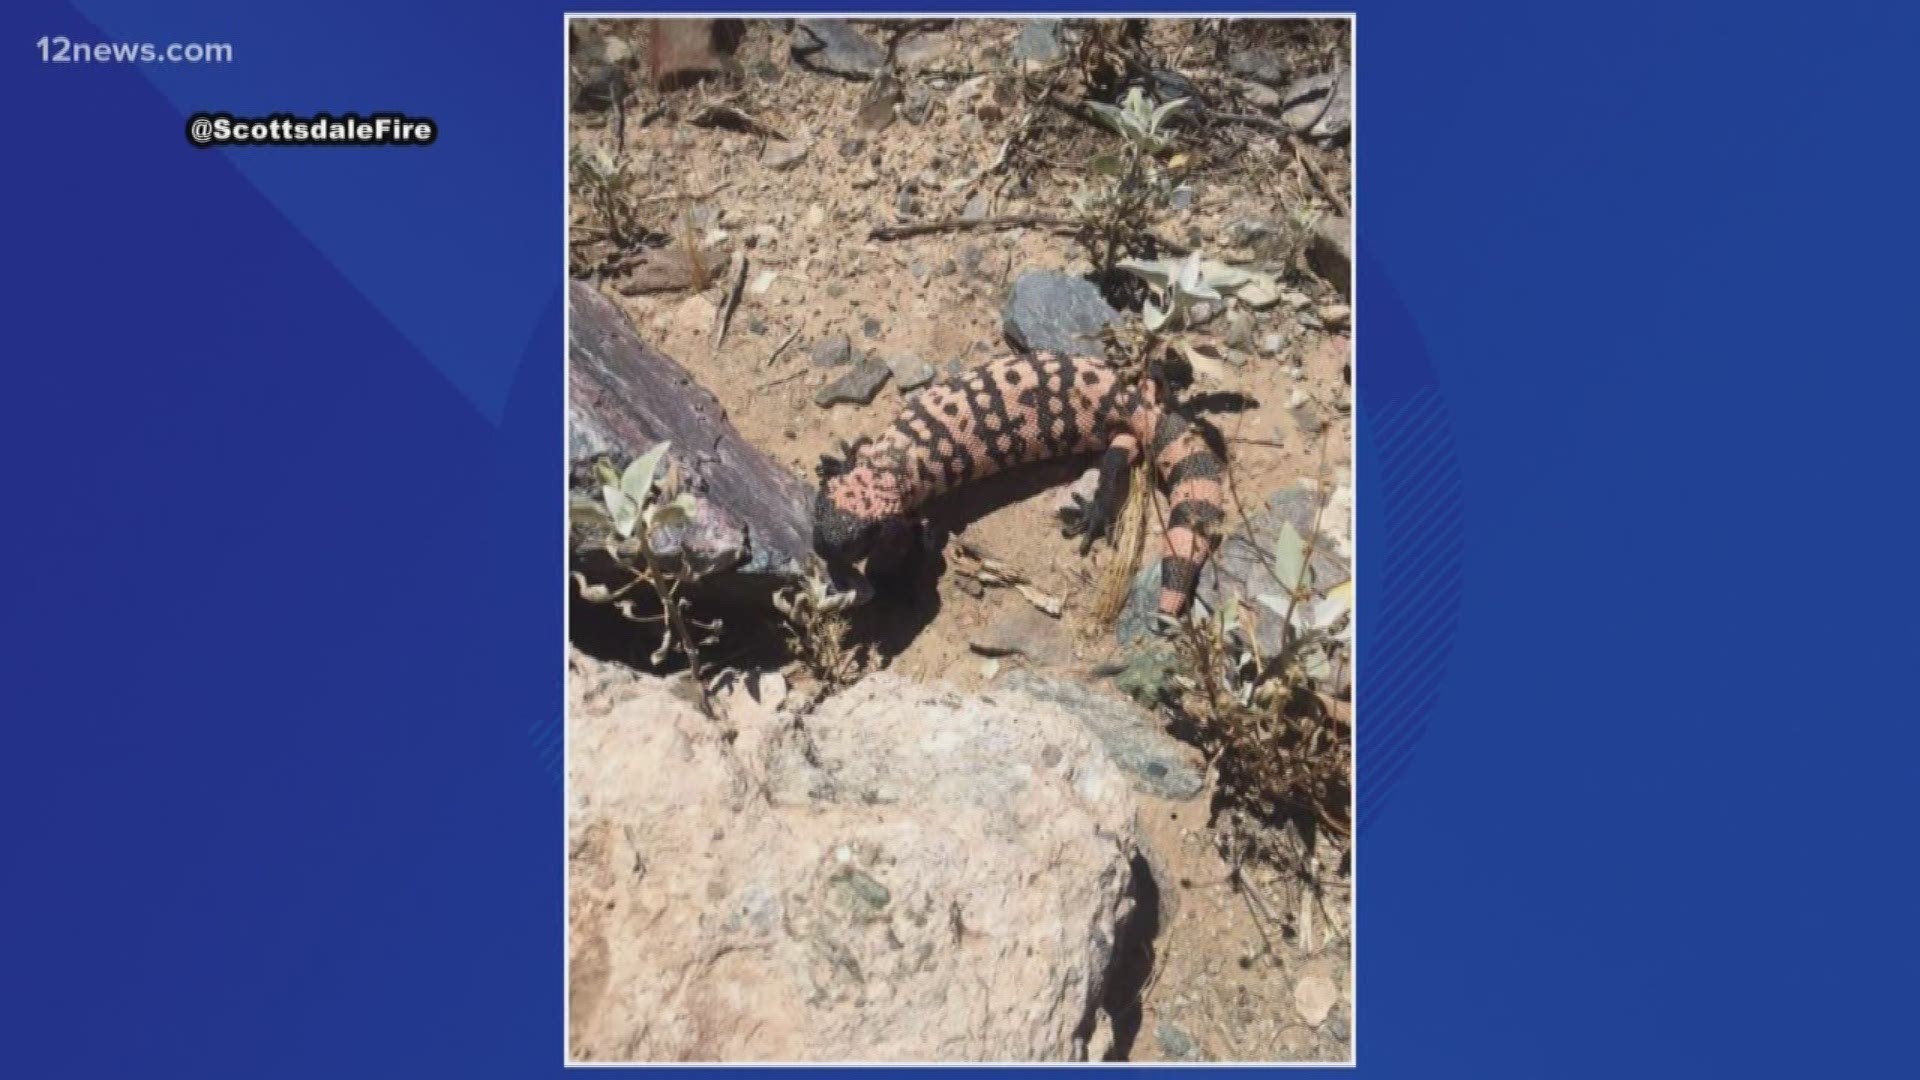 Scottsdale firefighters were called out to a home to relocate a Gila monster so painters could continue their work. When firefighters remove Gila monsters they make sure to put them in a safe and natural area.